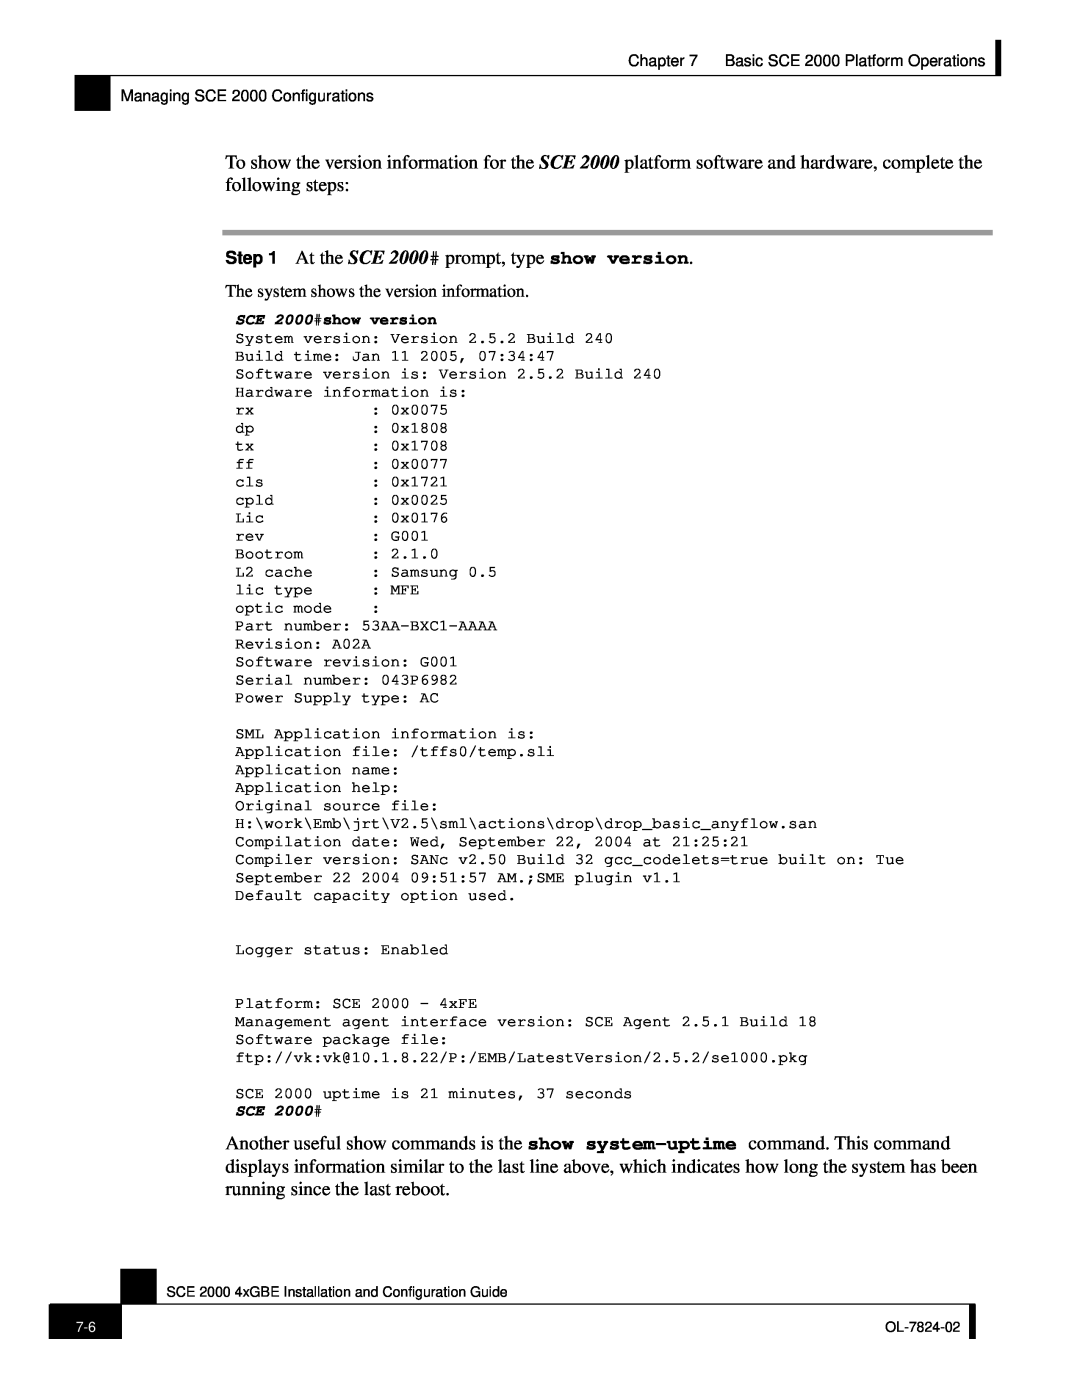 Cisco Systems SCE 2000 4xGBE manual At the SCE 2000# prompt, type show version 